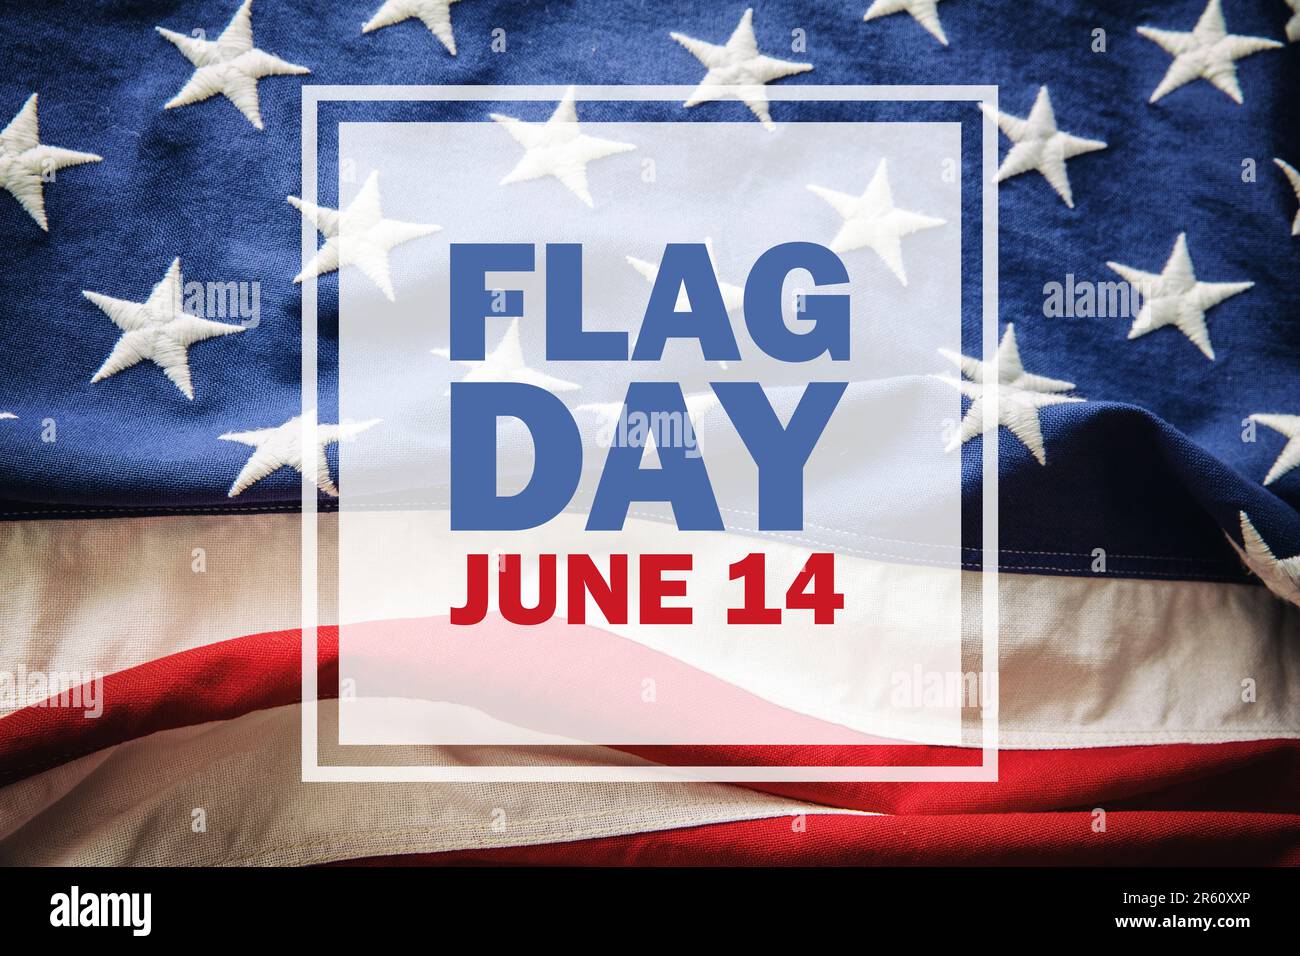 America flag day. U.S. Army birthday. United states national holiday, June 14th, text on US flag background Stock Photo